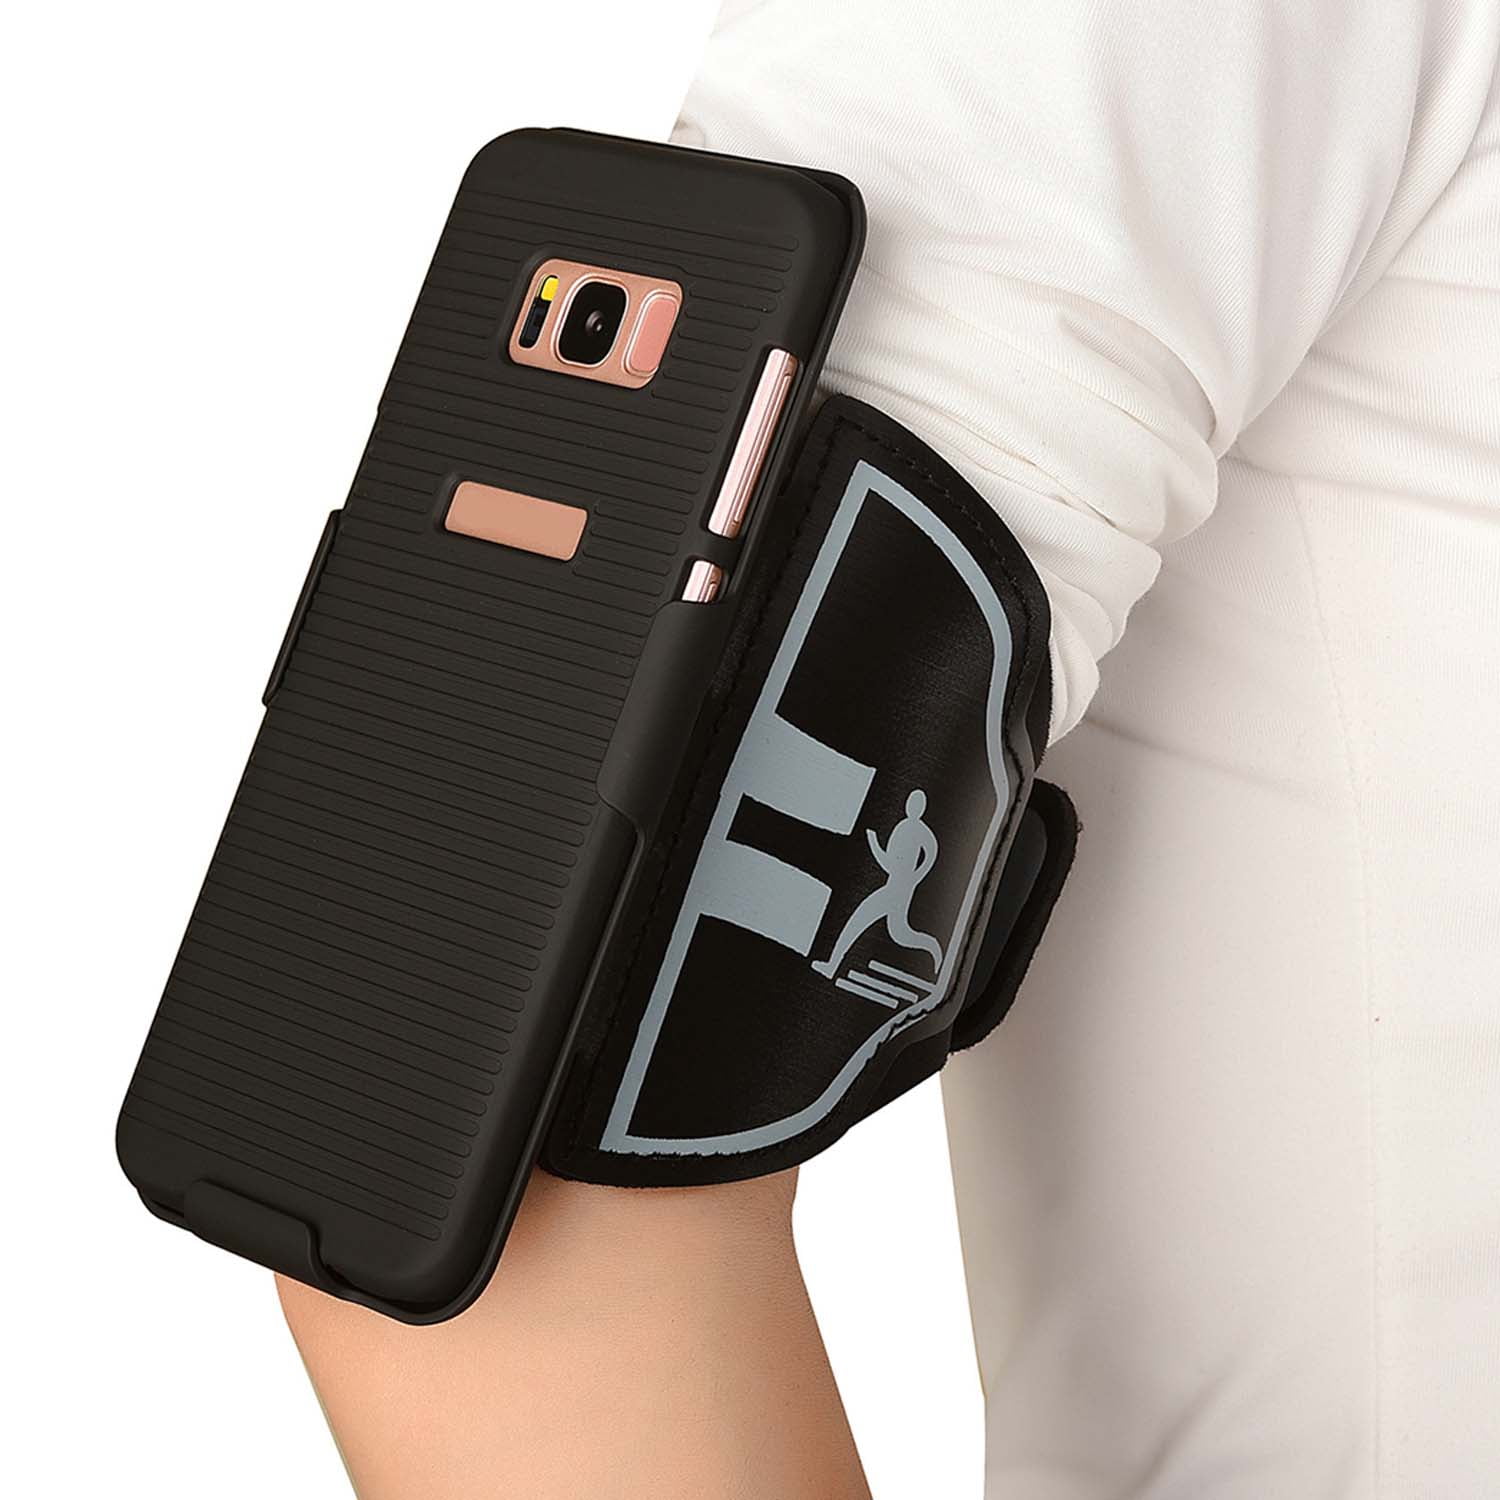 Sports Armband Case Holder For Galaxy S8 Plus Gym Running Jogging Arm Band Strap 